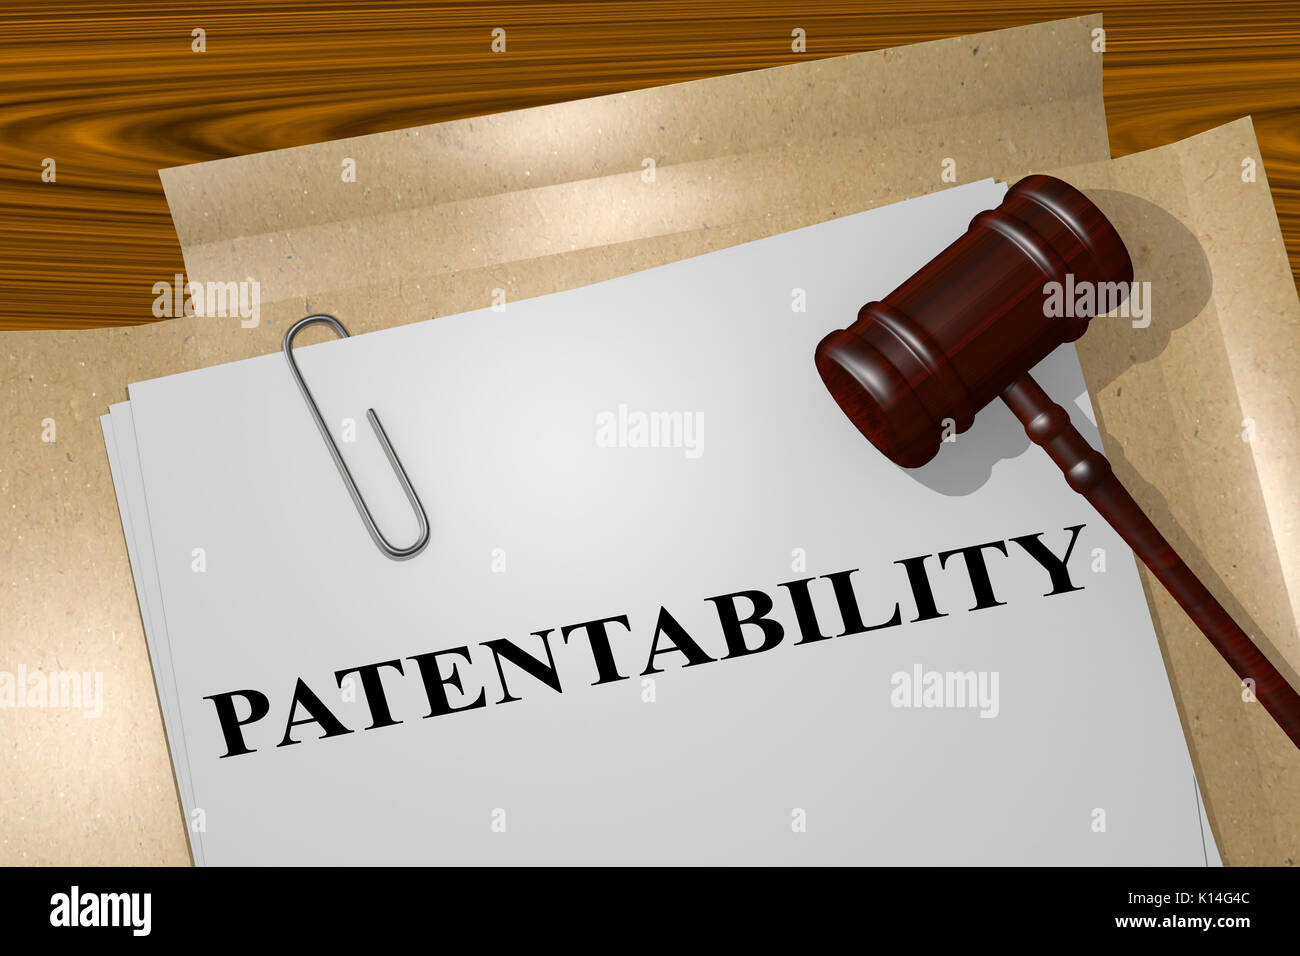 3D illustration of 'PATENTABILITY' title on legal document Stock Photo